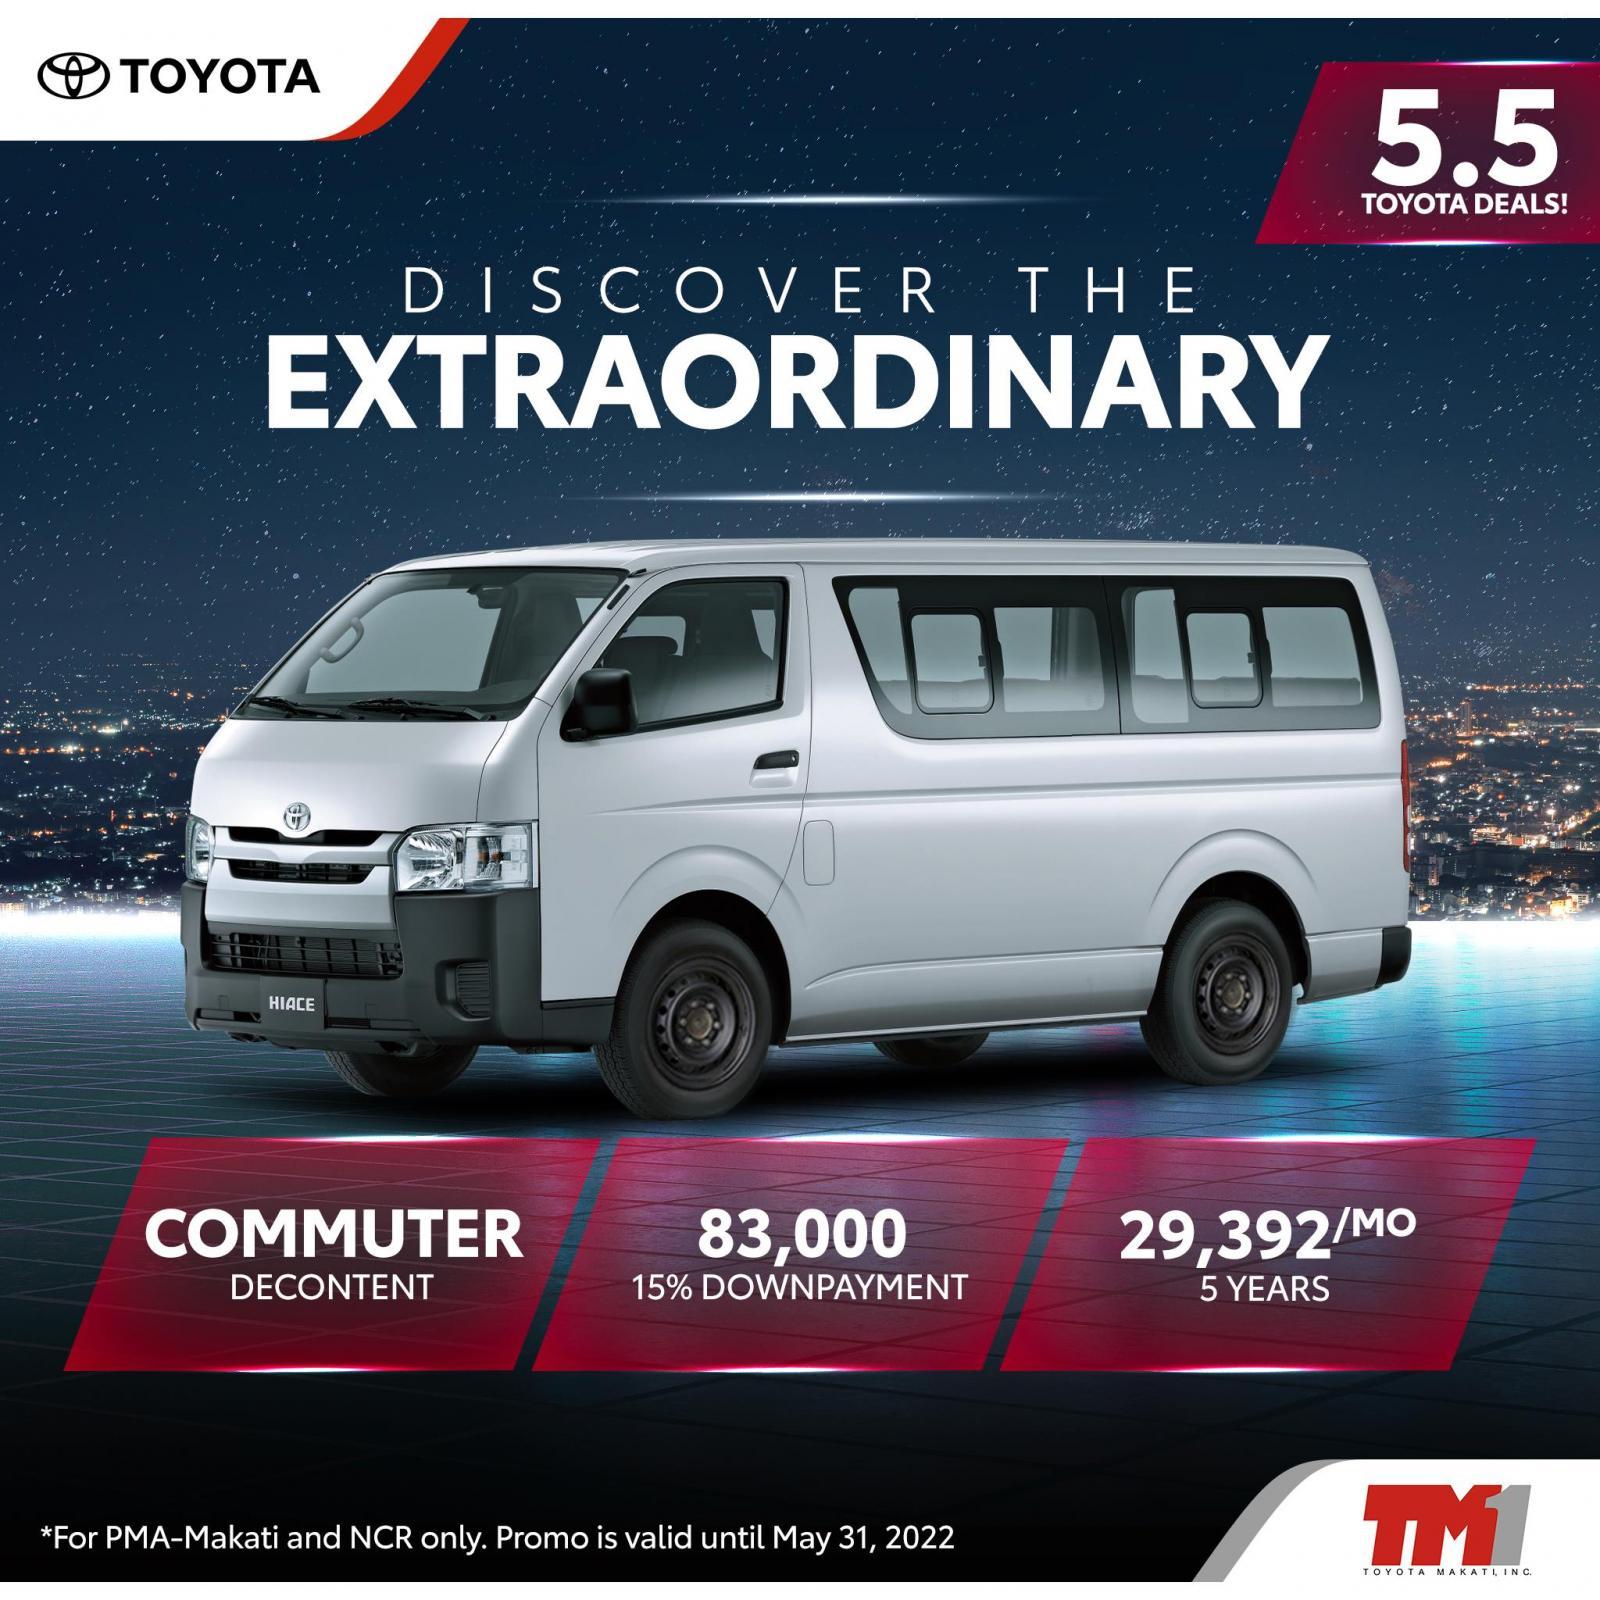 Toyota Hiace Commuter Decontent With ₱83,000 Allin Down payment